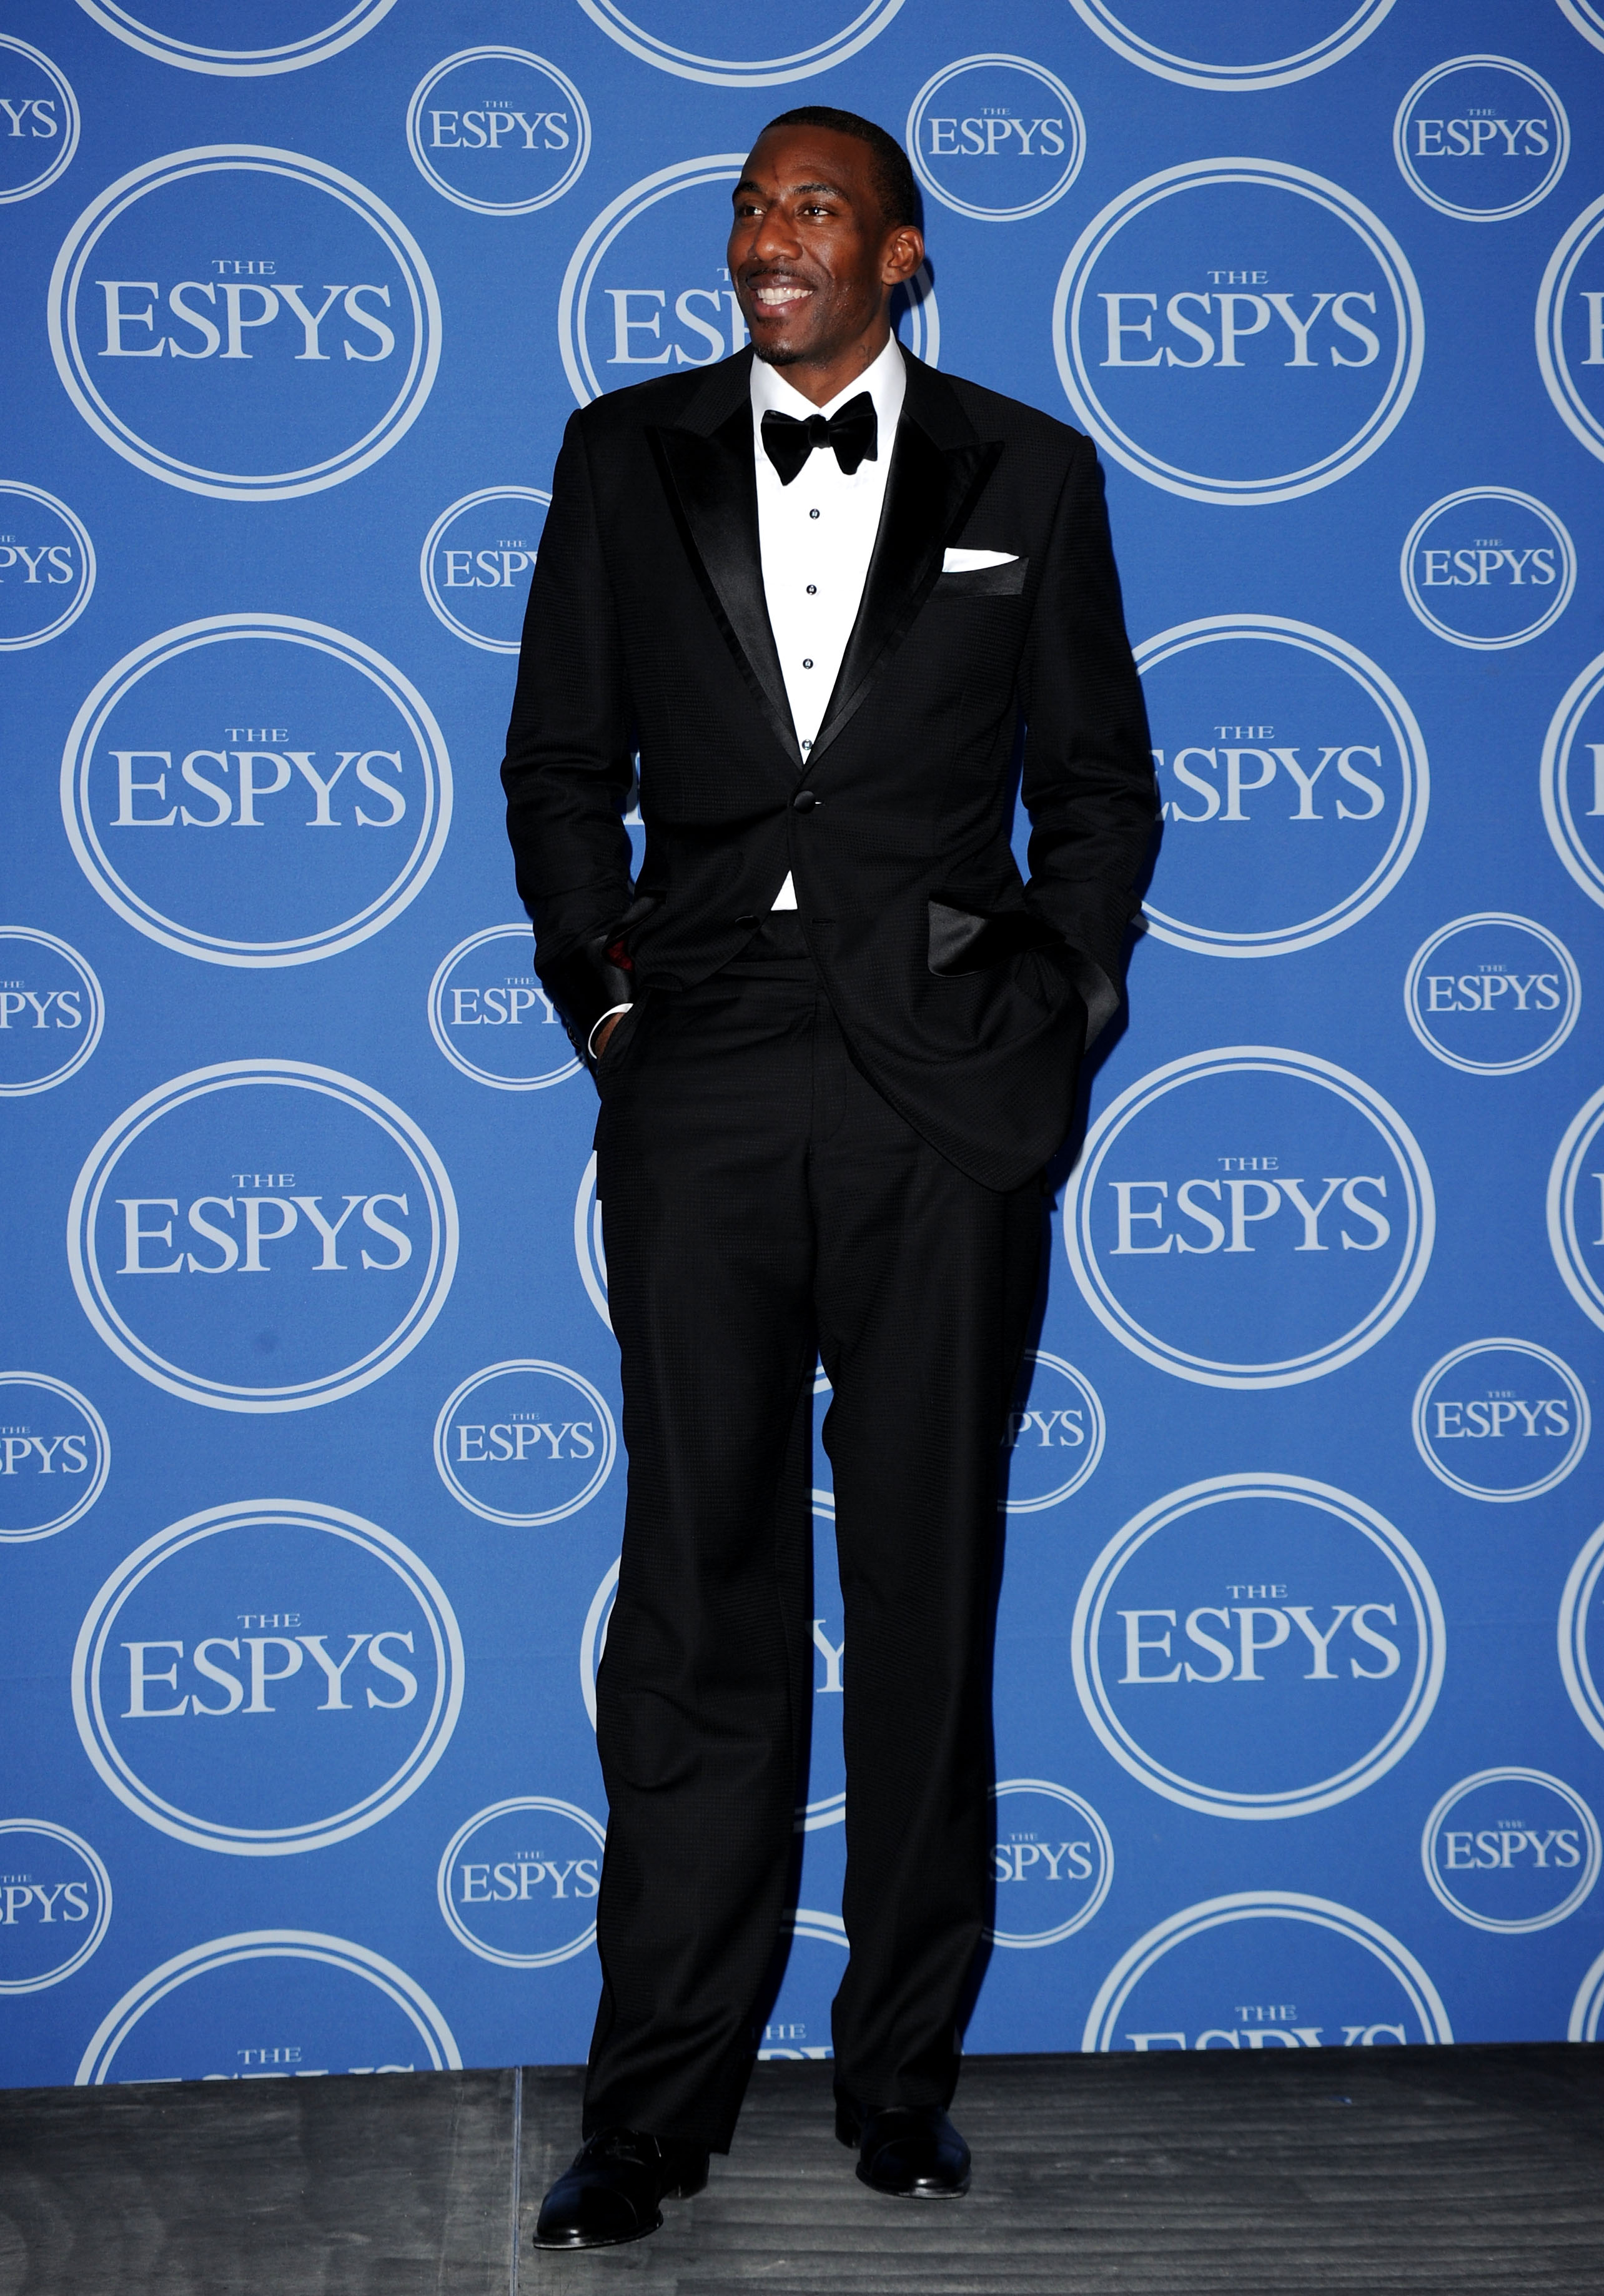 LOS ANGELES, CA - JULY 14:  Amar'e Stoudemire of the New York Knicks poses in press room during the 2010 ESPY Awards at Nokia Theatre L.A. Live on July 14, 2010 in Los Angeles, California.  (Photo by Jason Merritt/Getty Images)